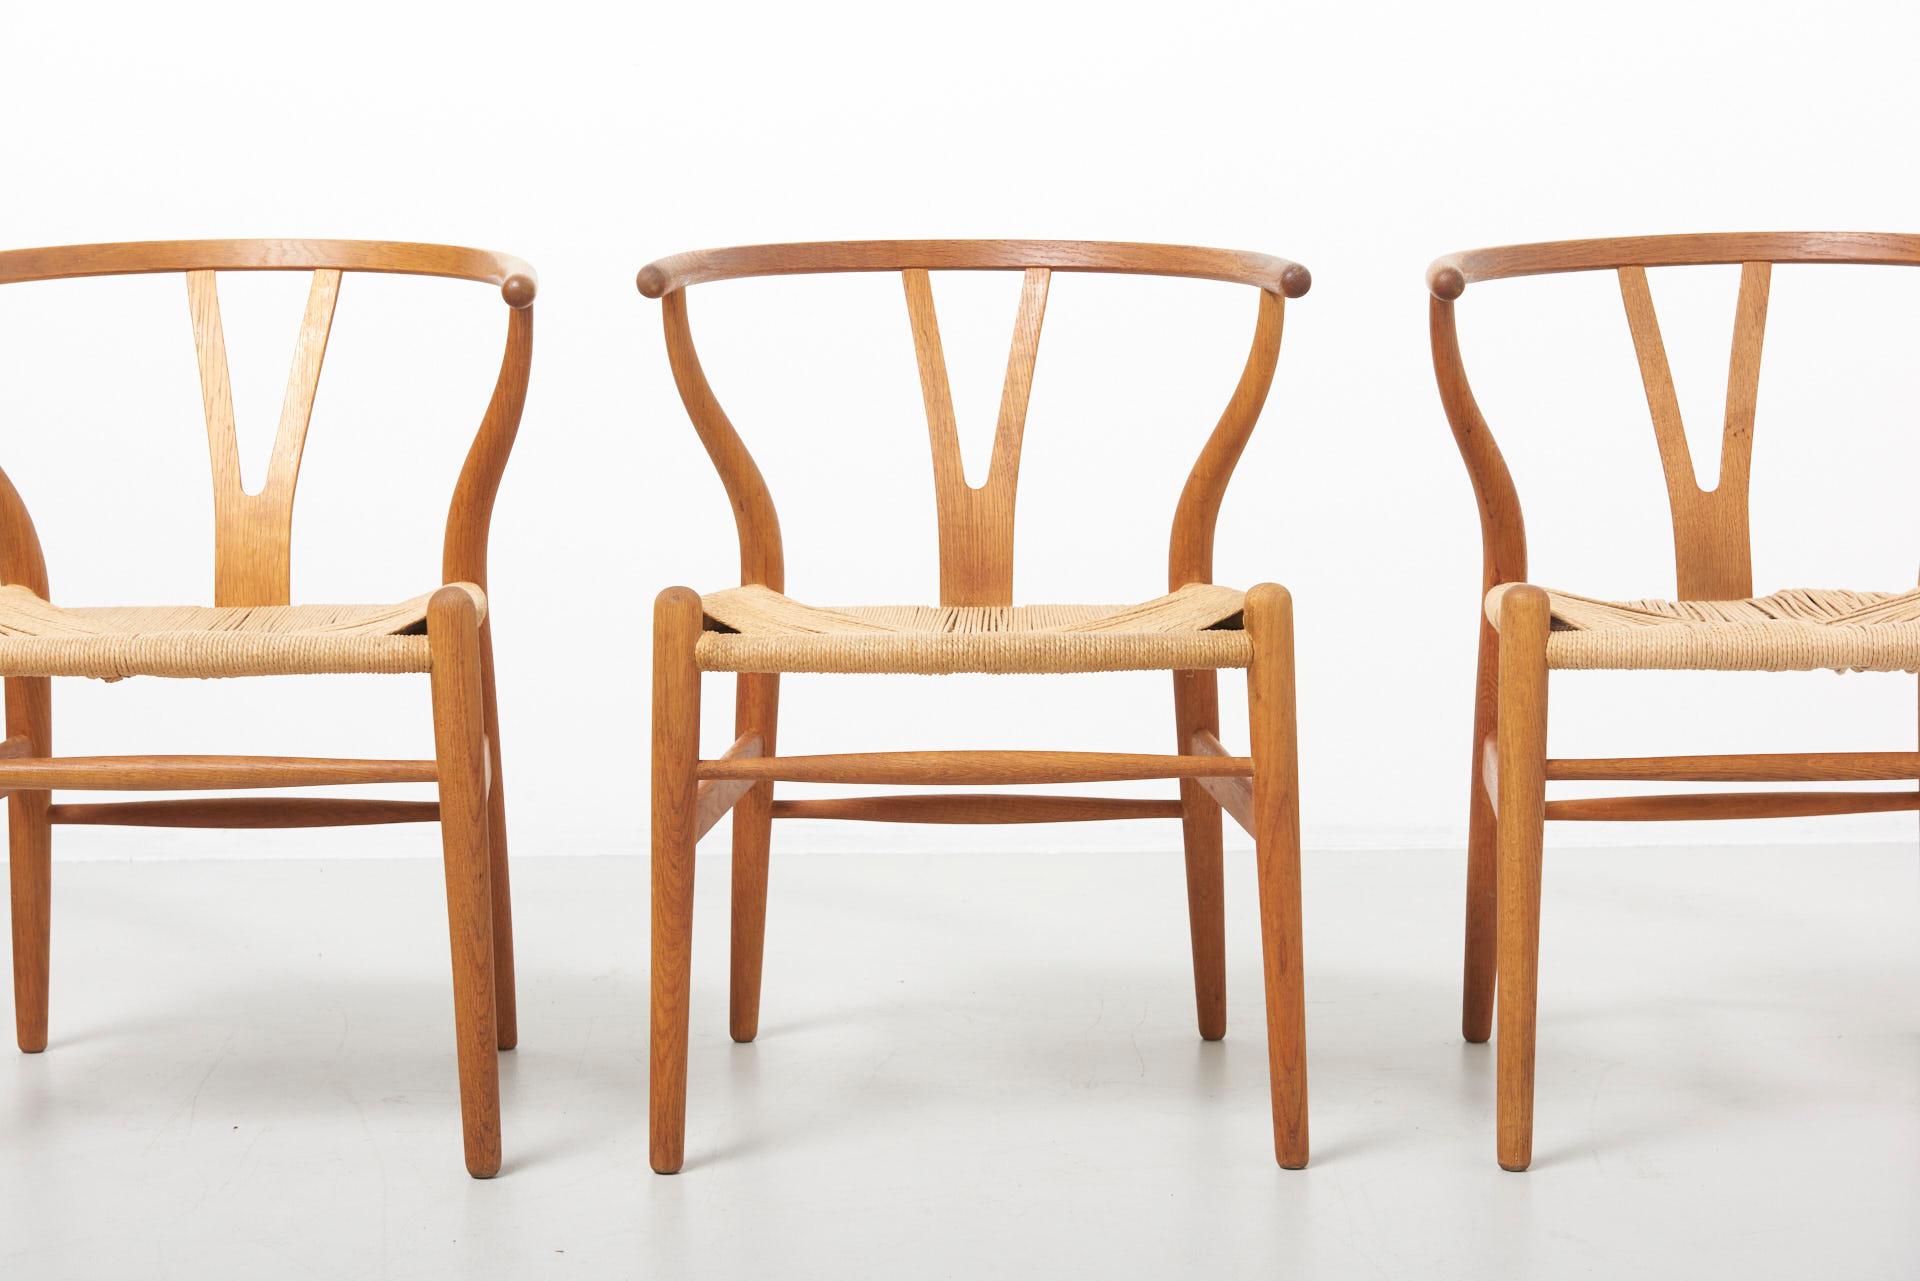 A set of 4 dining chairs in soap treated oak with paper cord seats, known as the Wishbone chair. Design by Hans J. Wegner in 1950. Model CH24, made by Carl Hansen in Denmark. These chairs were made in 1997.